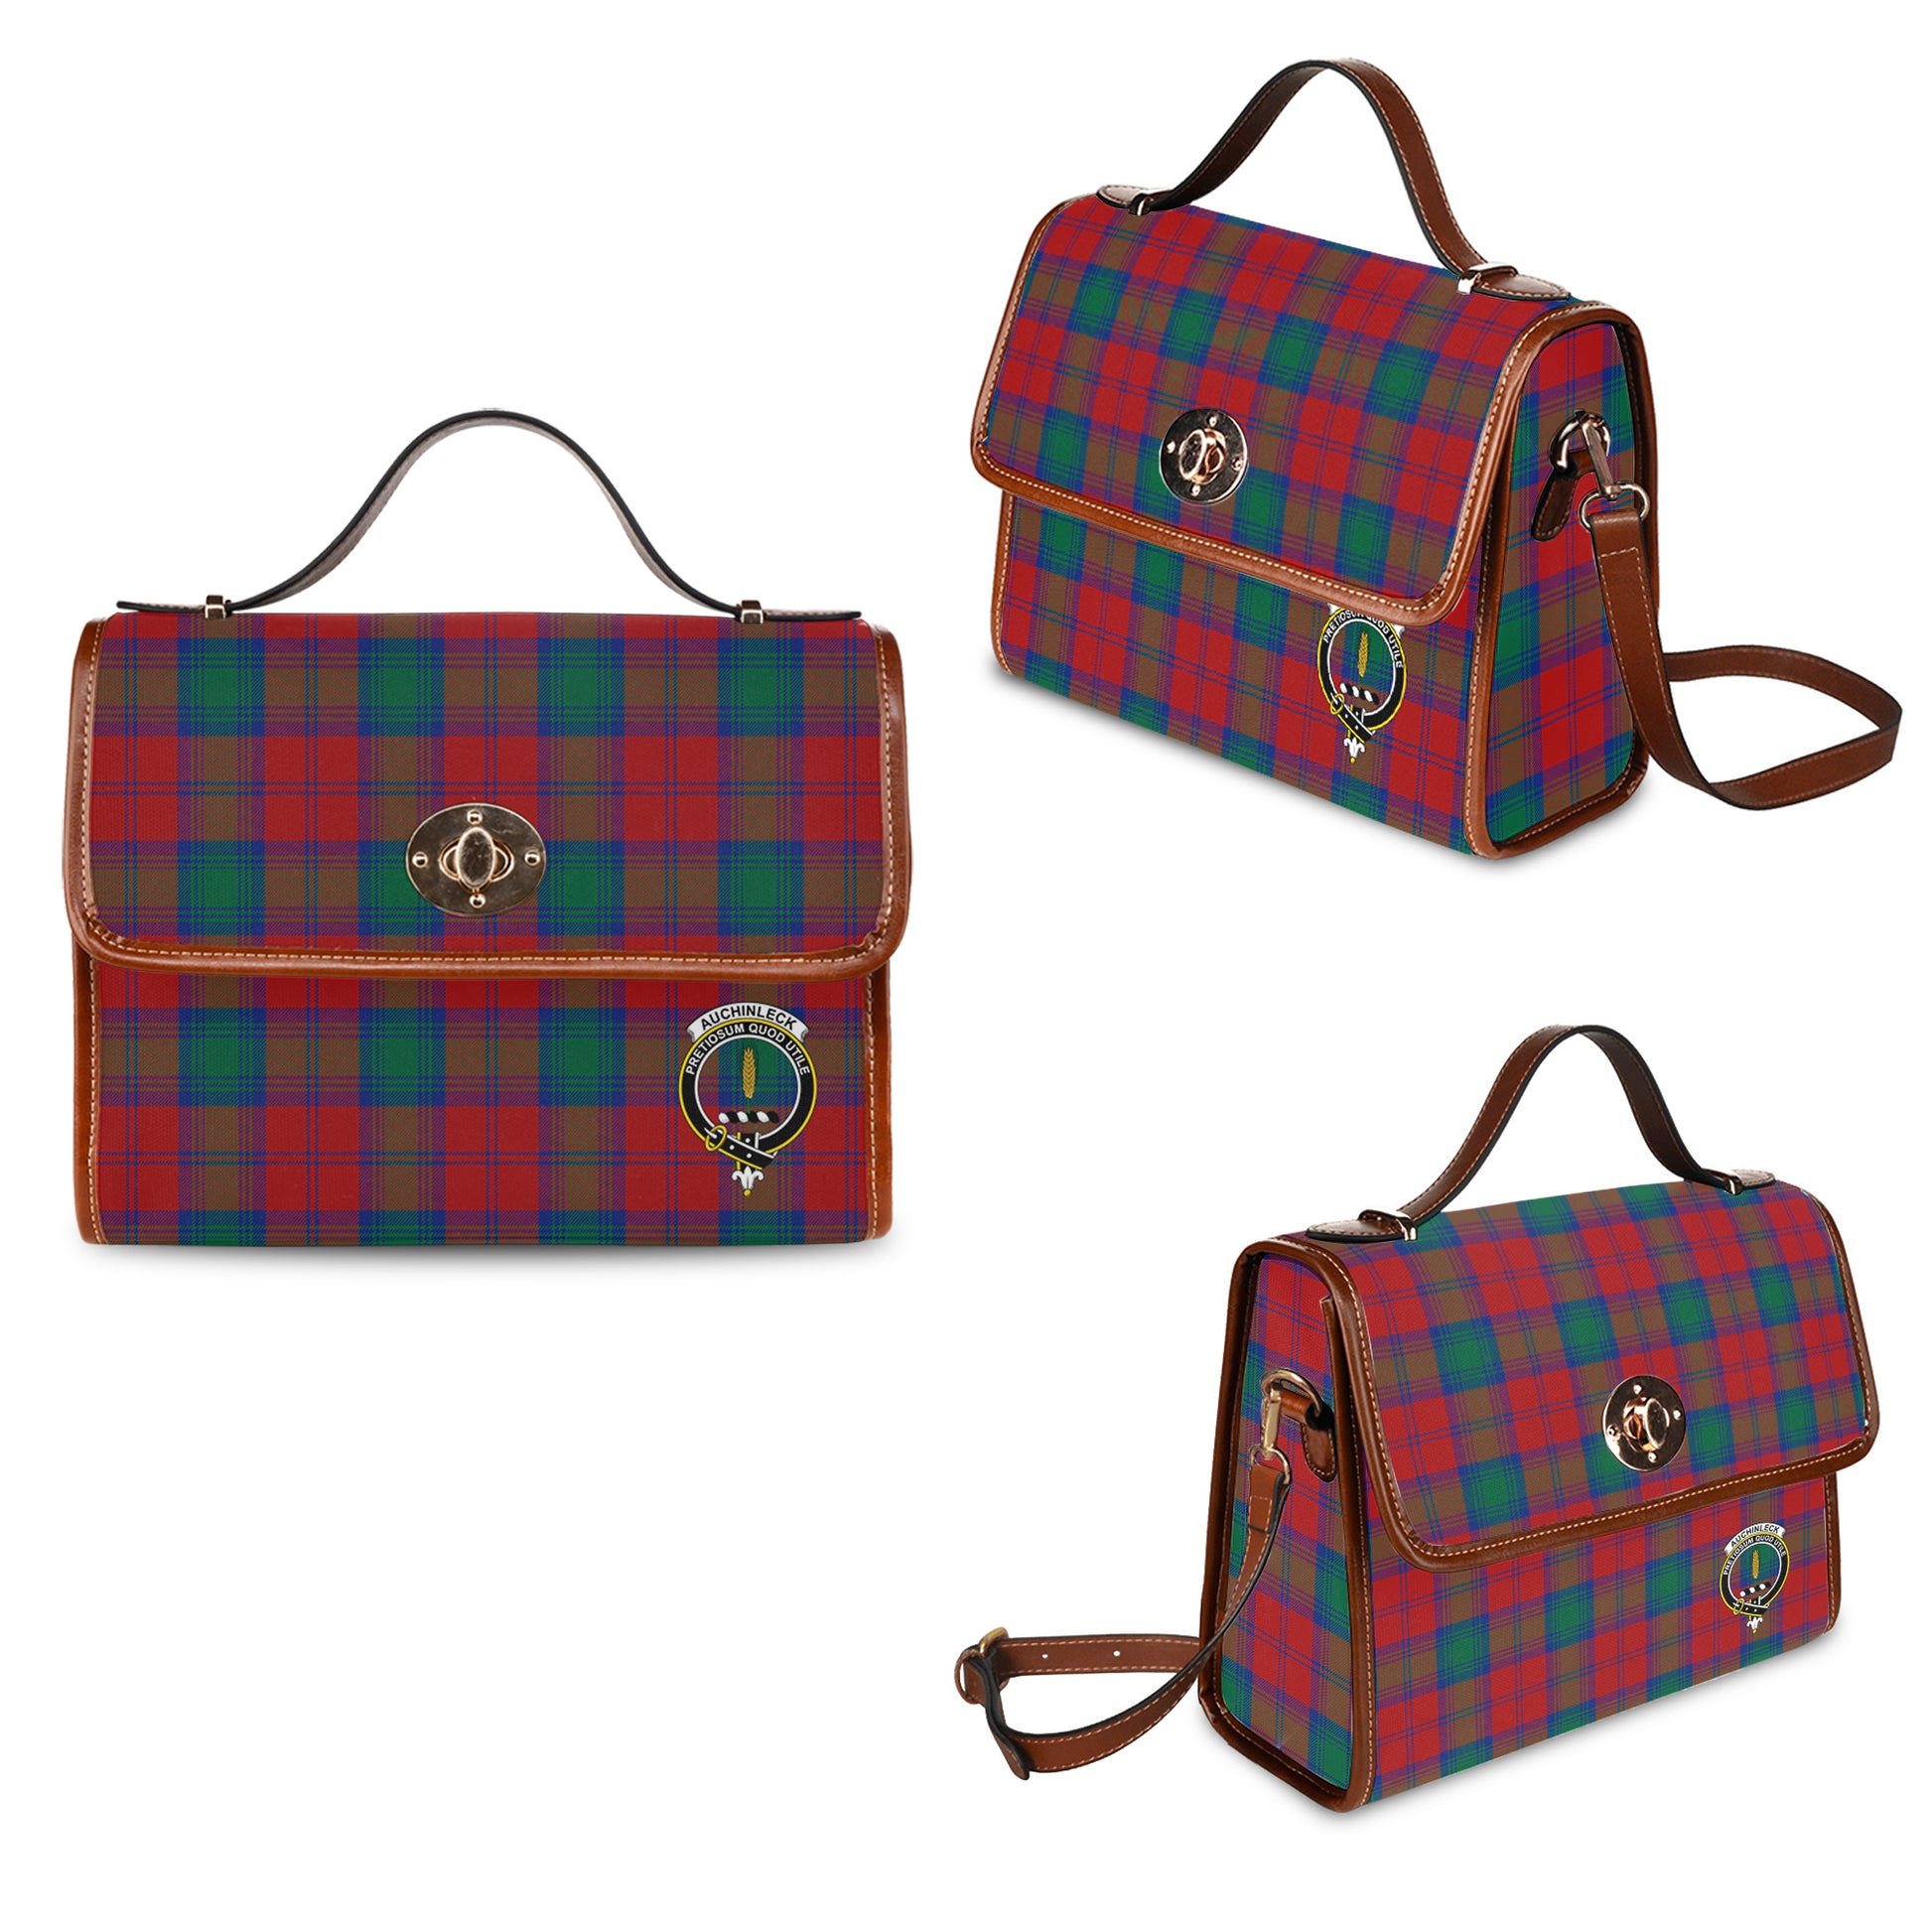 Auchinleck Tartan Leather Strap Waterproof Canvas Bag with Family Crest One Size 34cm * 42cm (13.4" x 16.5") - Tartanvibesclothing